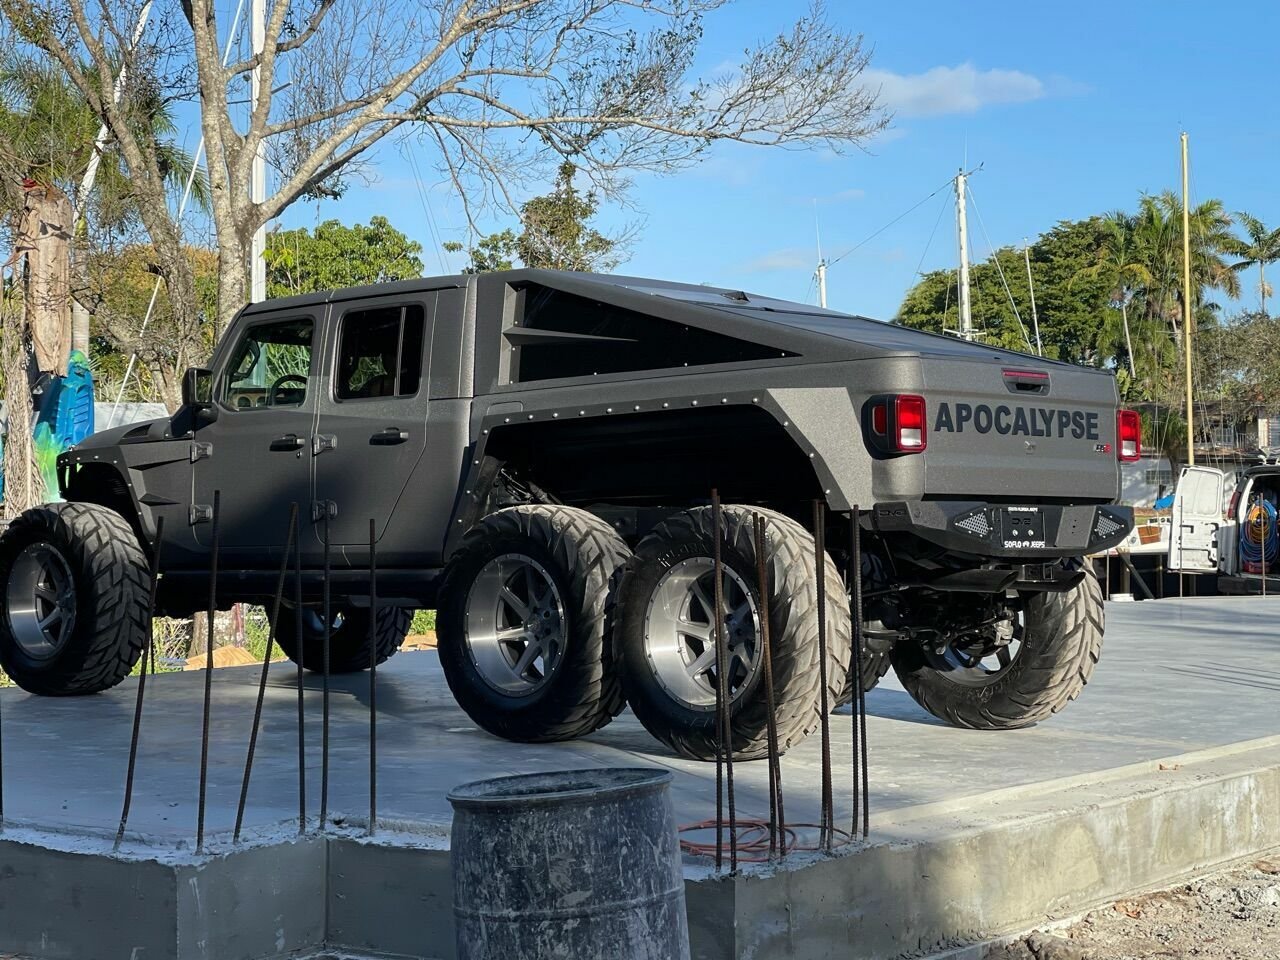 Jeep-Based Apocolypse Hellfire 6×6 Is A Crazy Road Legal Vehicle